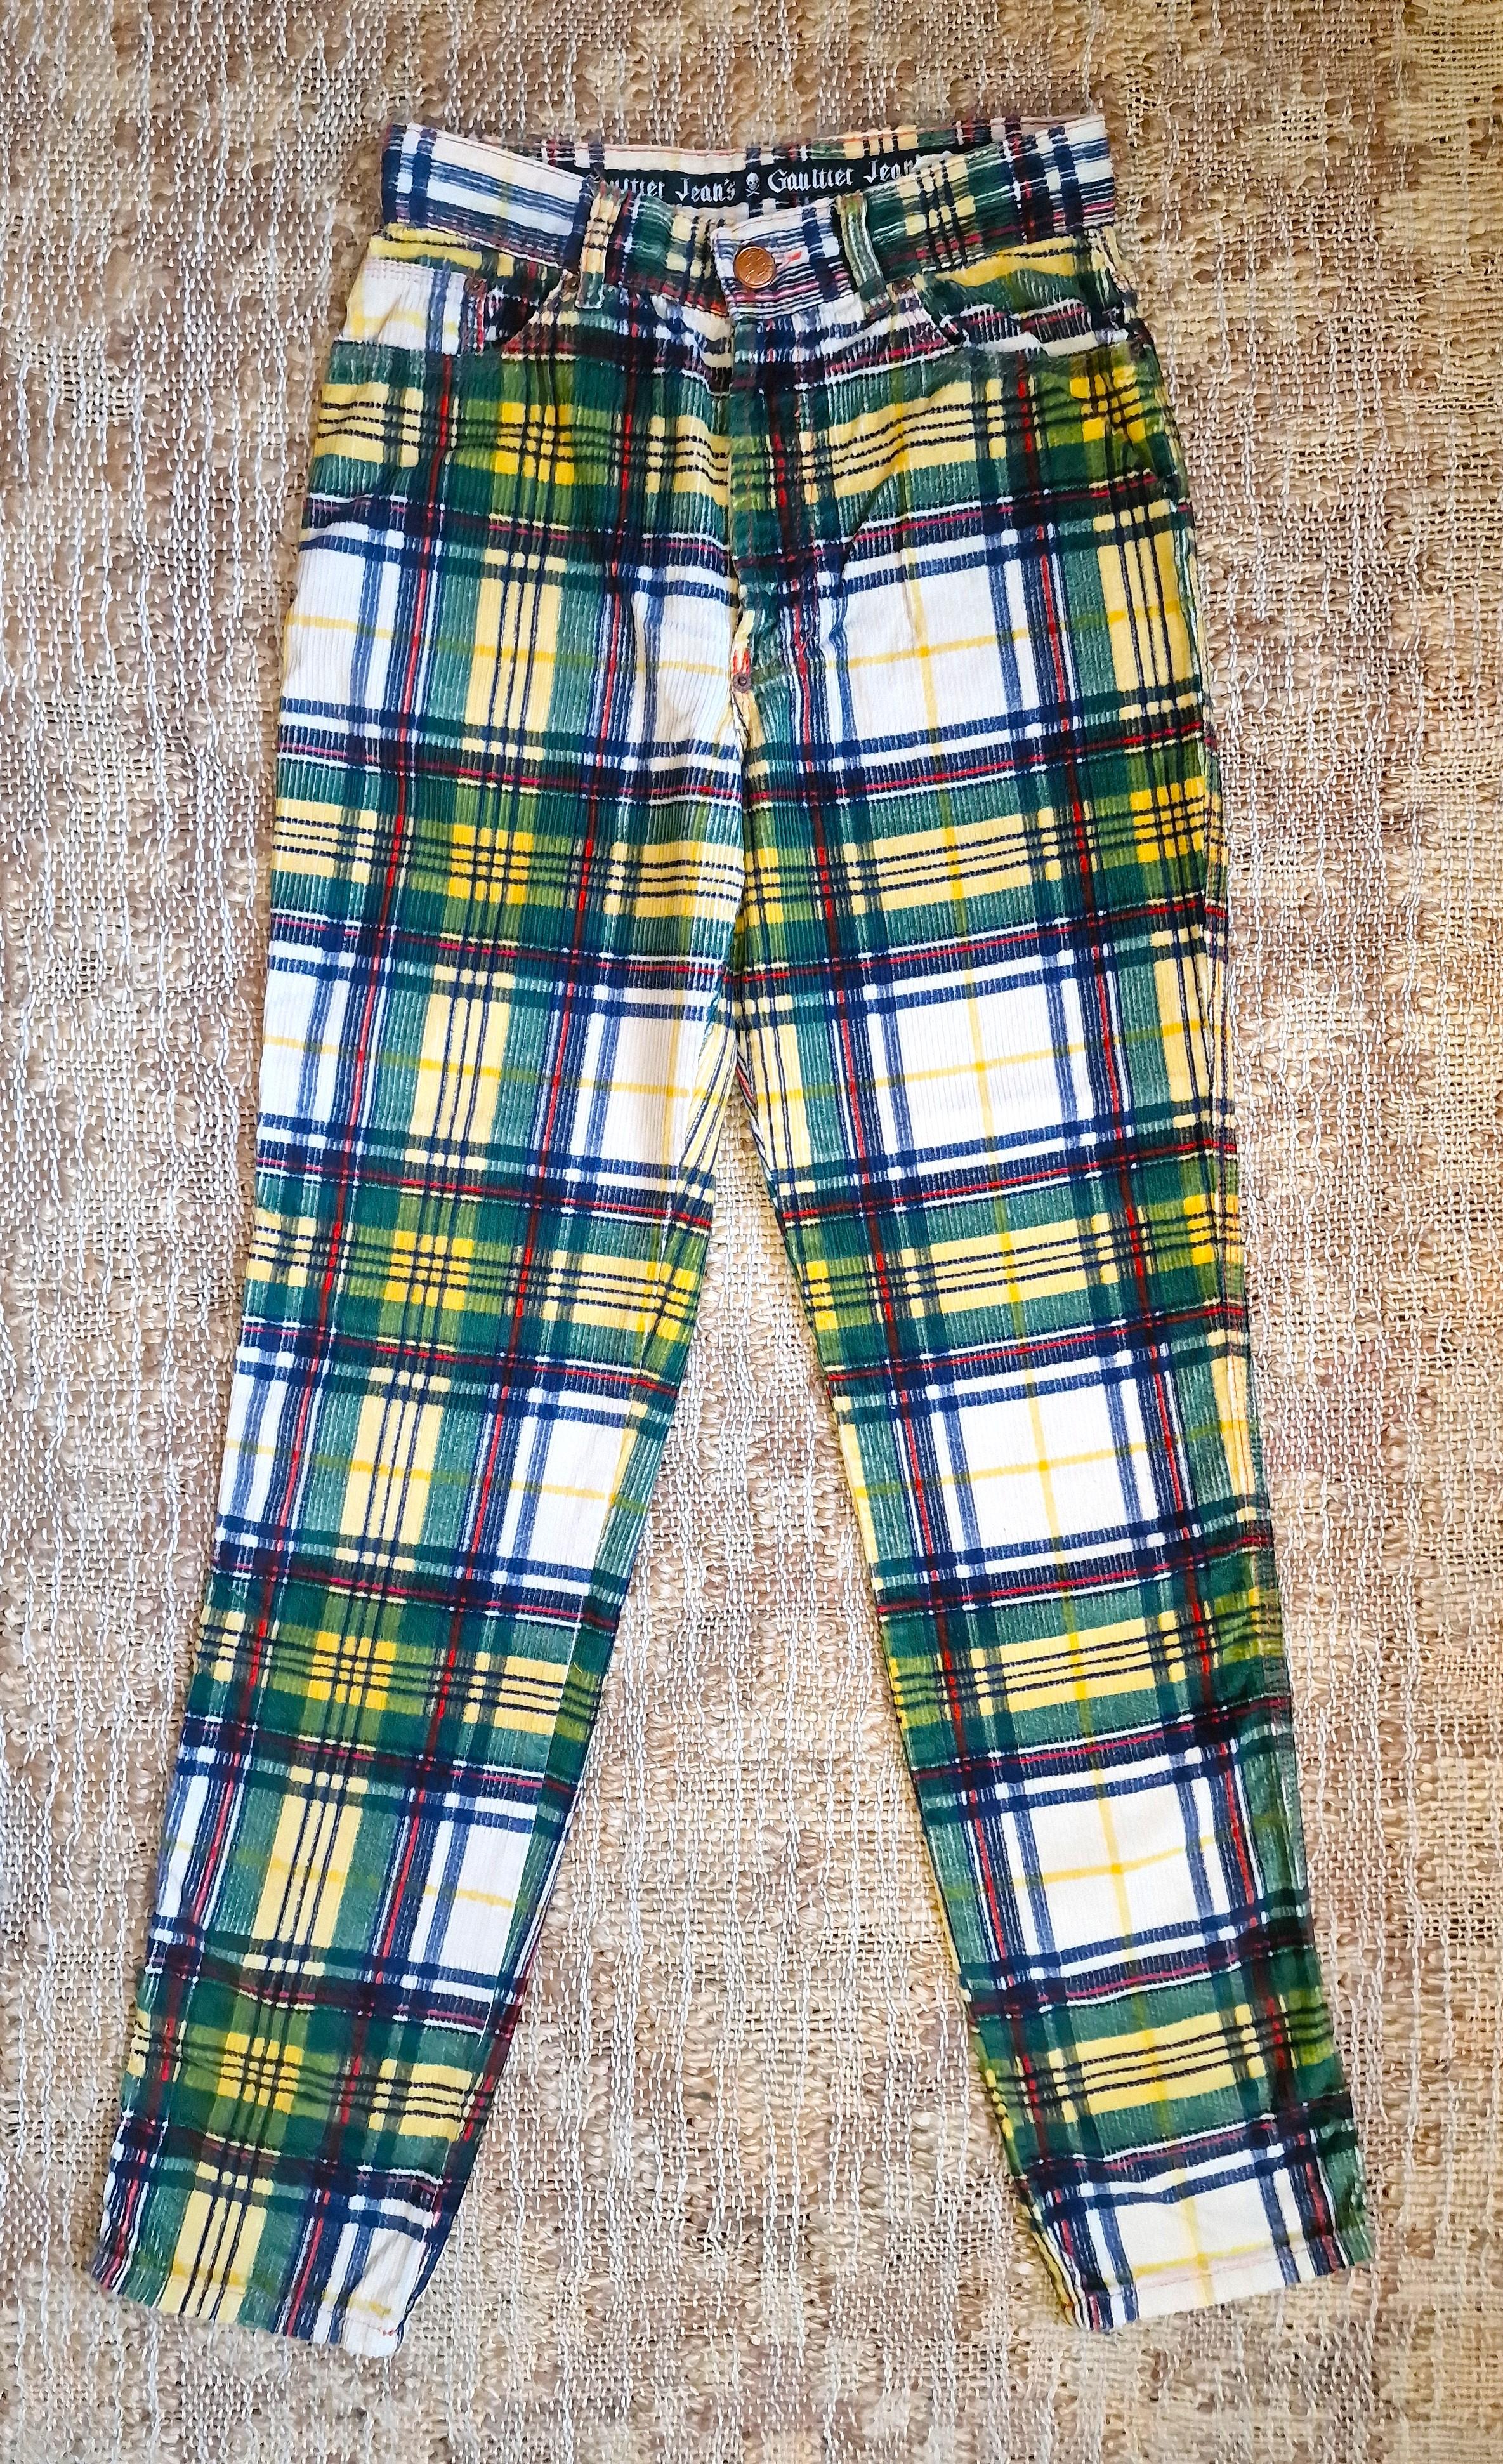 Gray Jean Paul Gaultier Tartan Plaid Checked Cord Trousers Small Medium Hand Pants For Sale